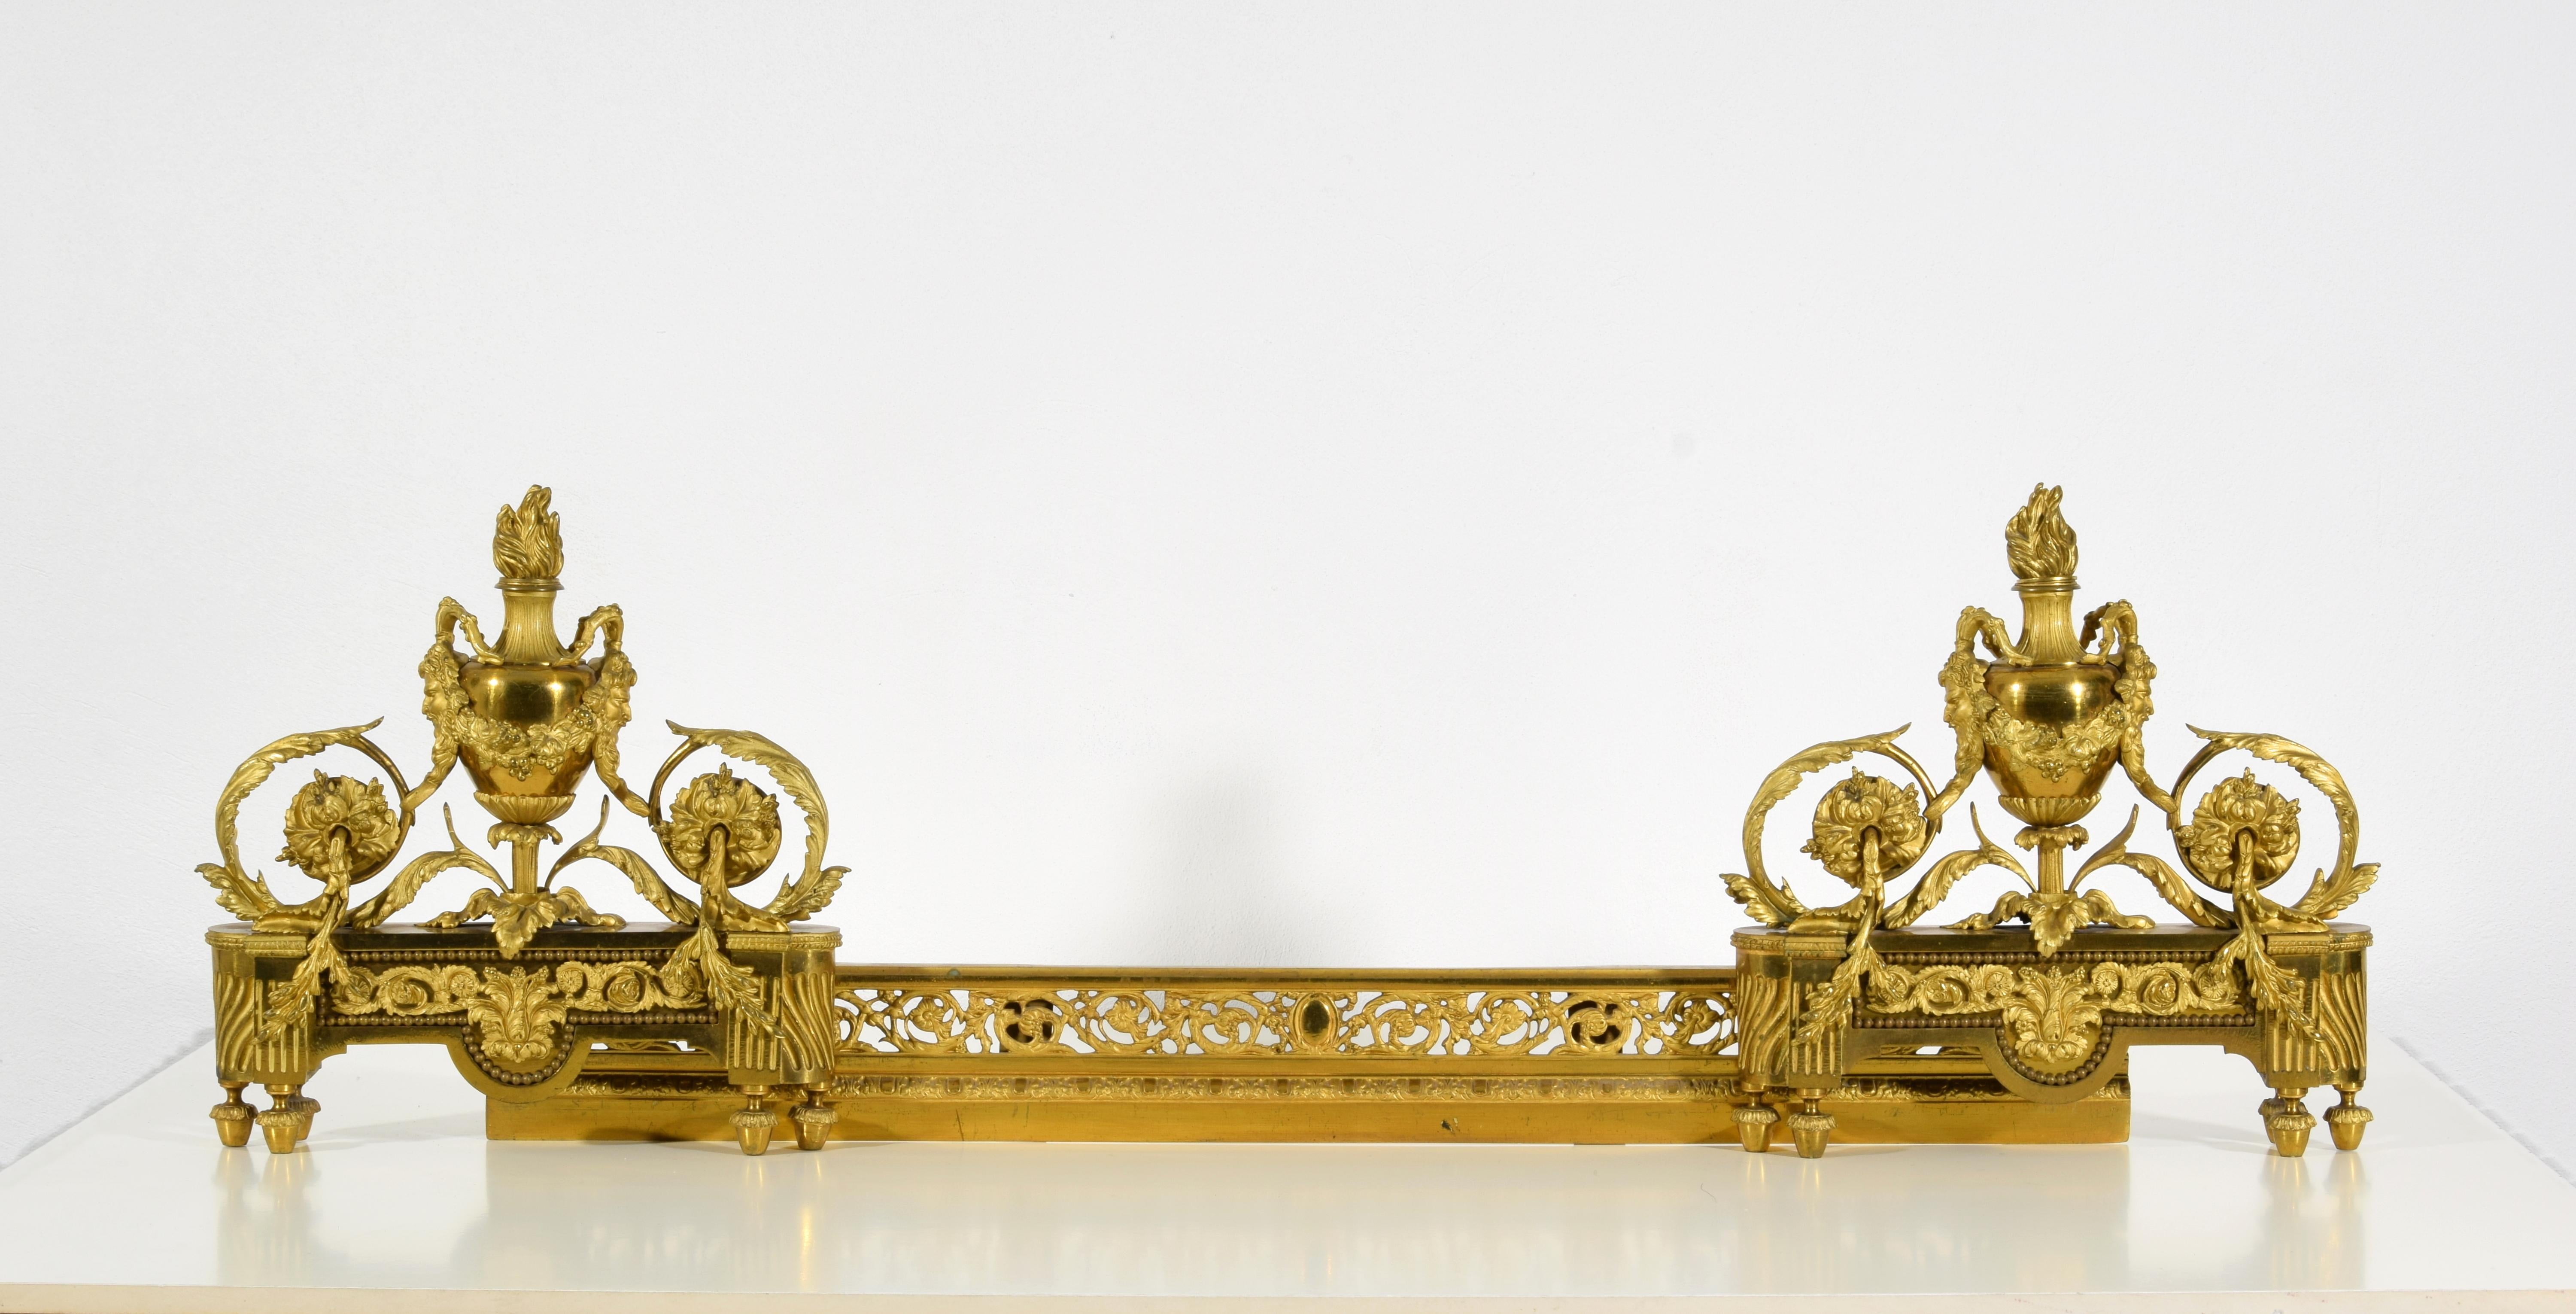 19th century, Pair of French Louis XVI Style Gild Bronze Fireplace Chenets 
Measures: closed: cm W 97 x H 34 x D 12; W maximum open cm 144,5

This elegant pair of fireplace chenets was made of finely chiseled gilded bronze in France in the 19th